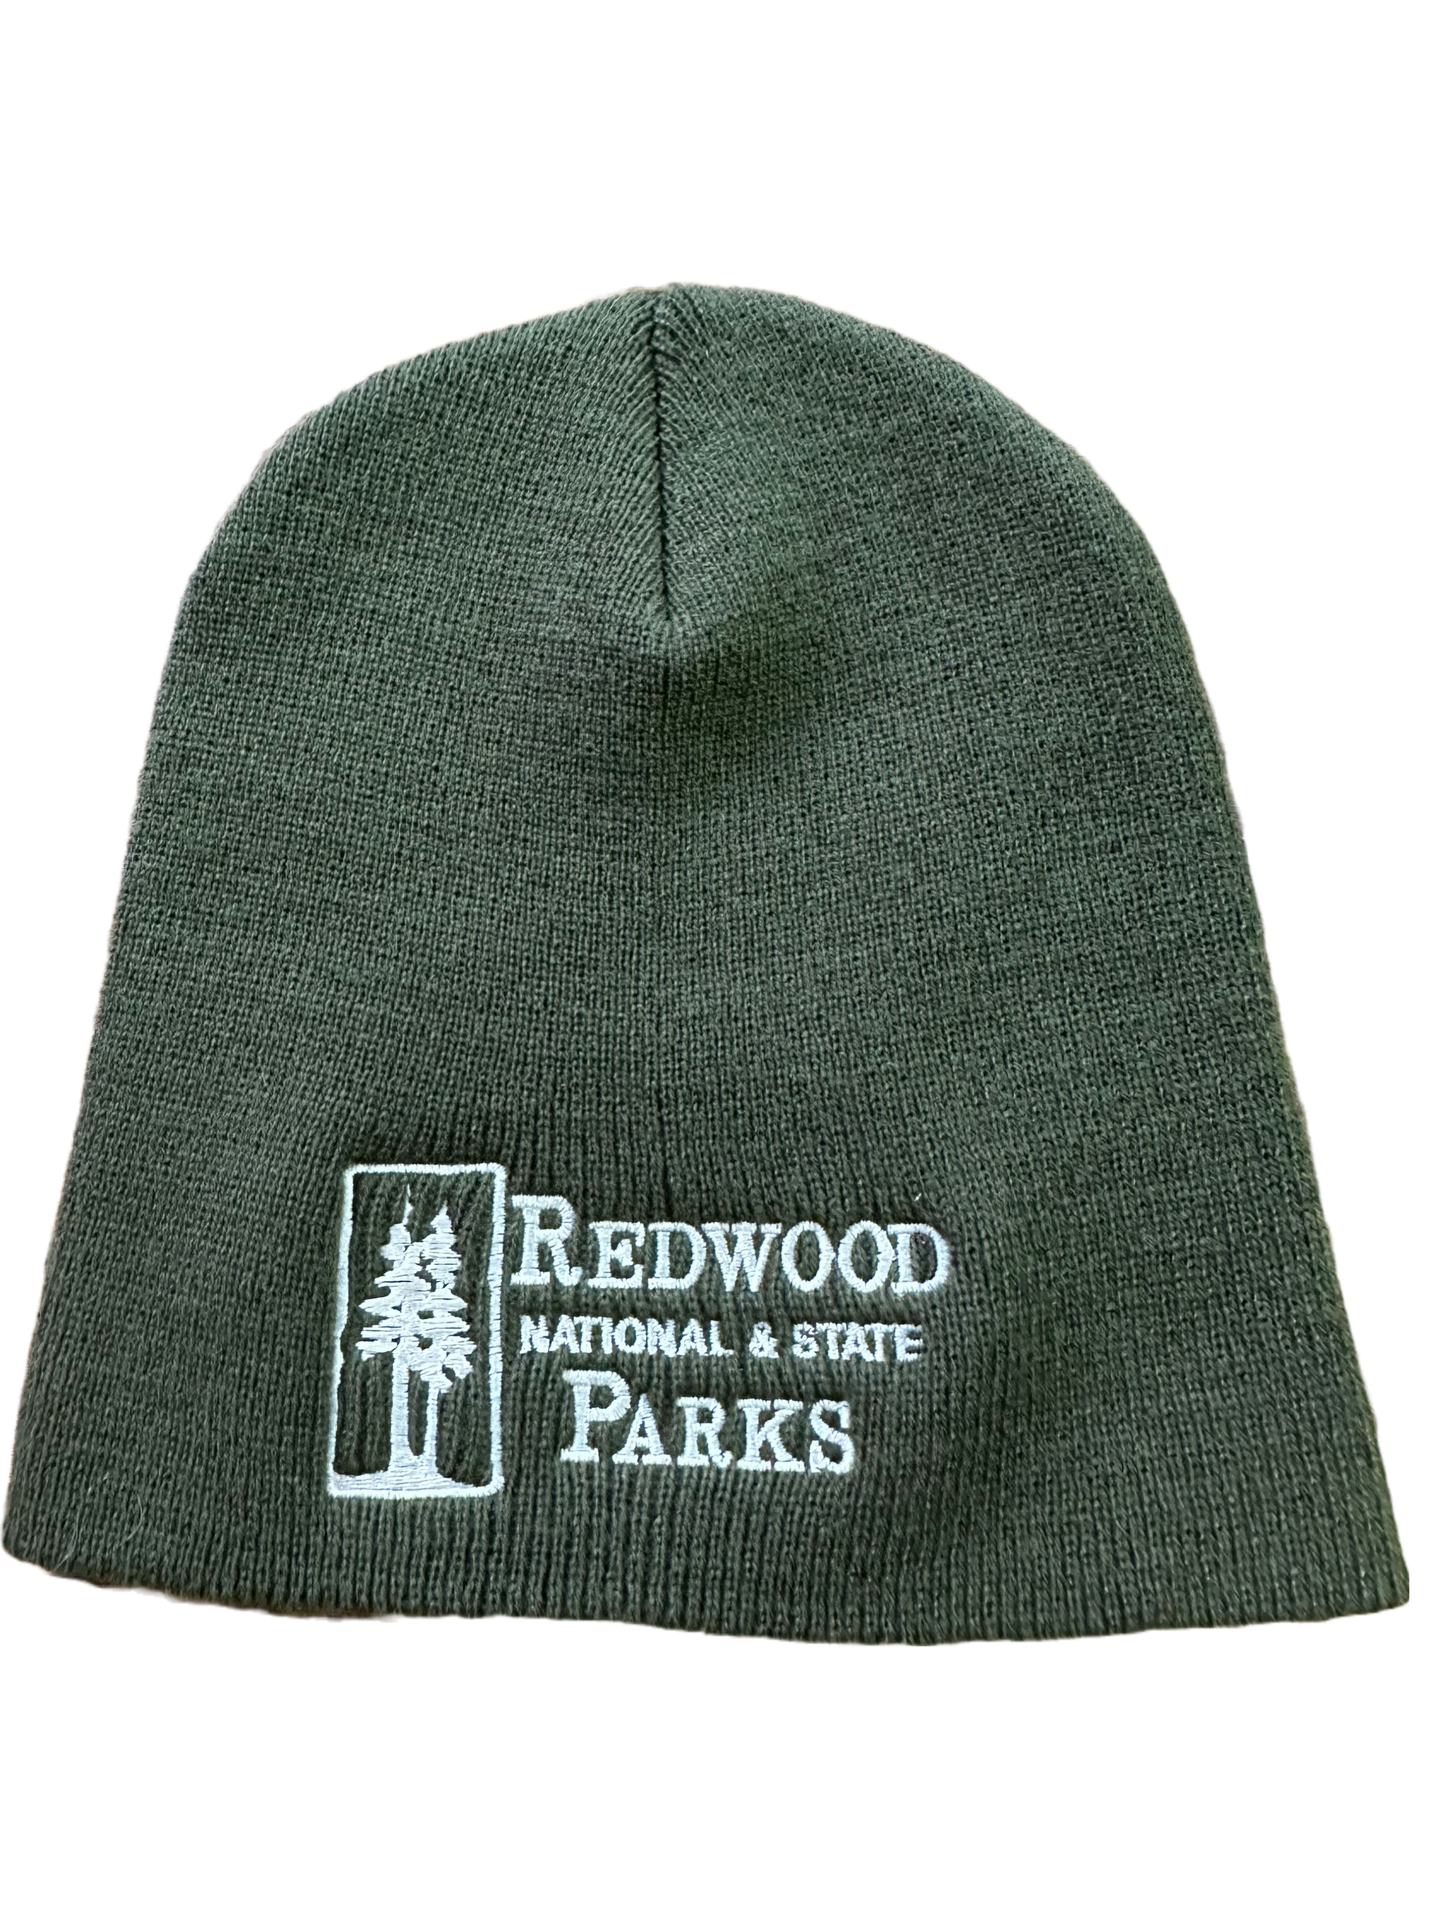 Redwood National & State Parks Beanie Green